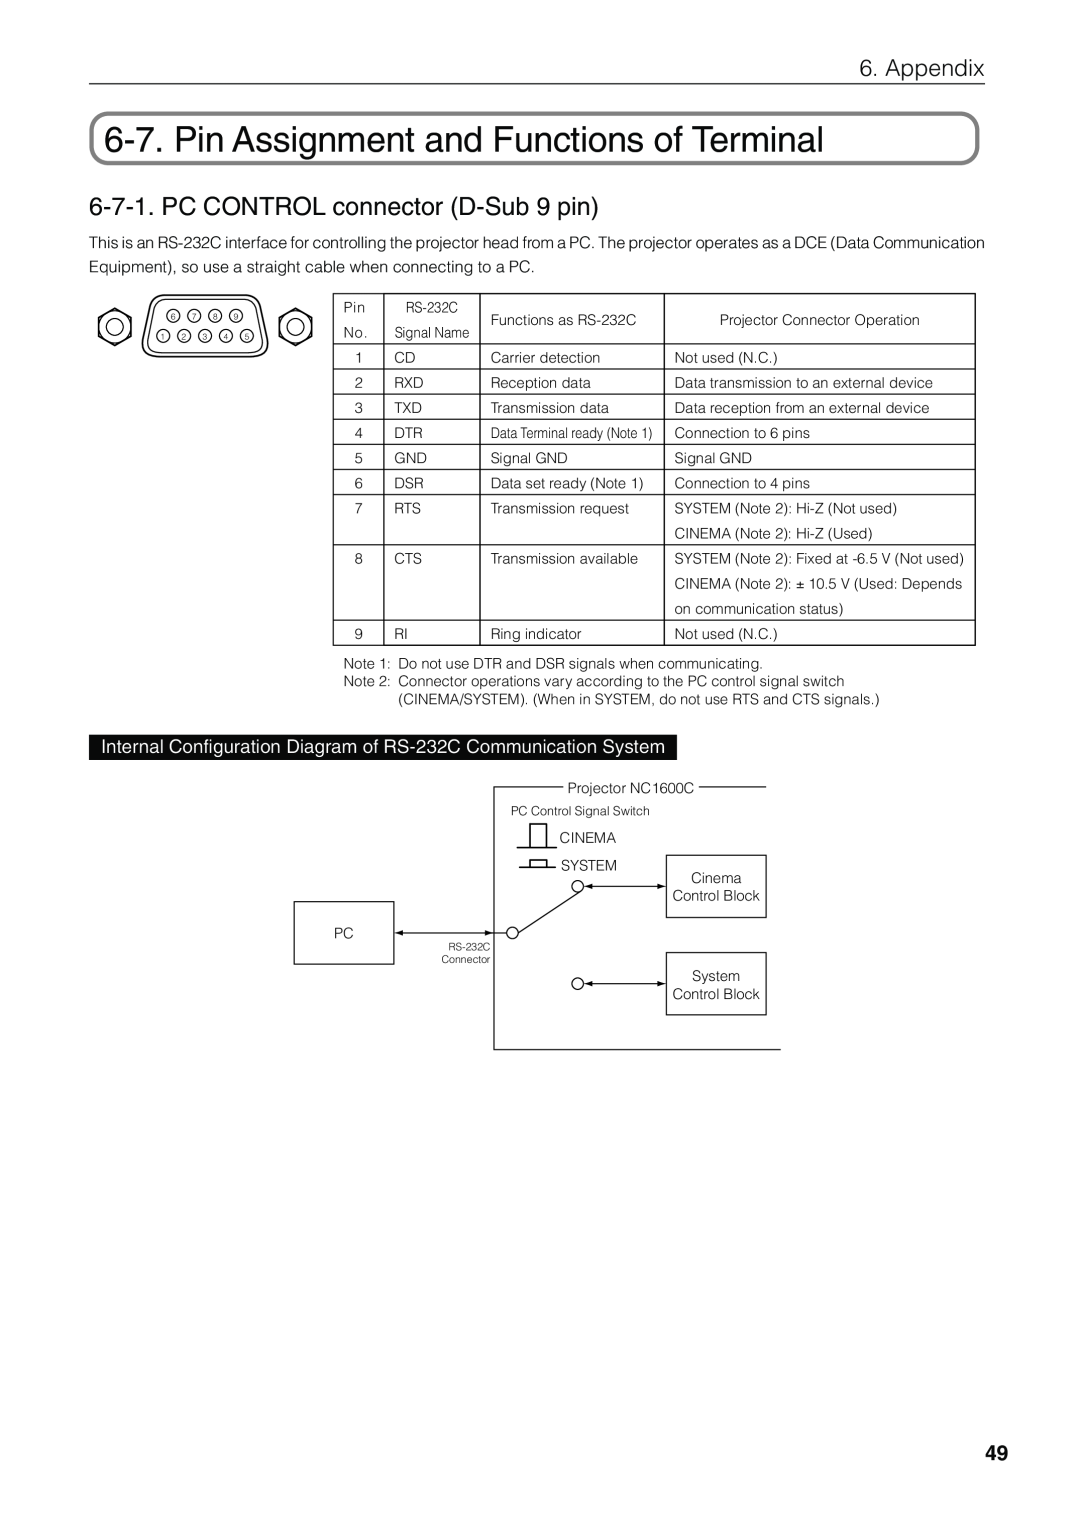 NEC NC1600C user manual Pin Assignment and Functions of Terminal, PC CONTROL connector D-Sub9 pin, Appendix 